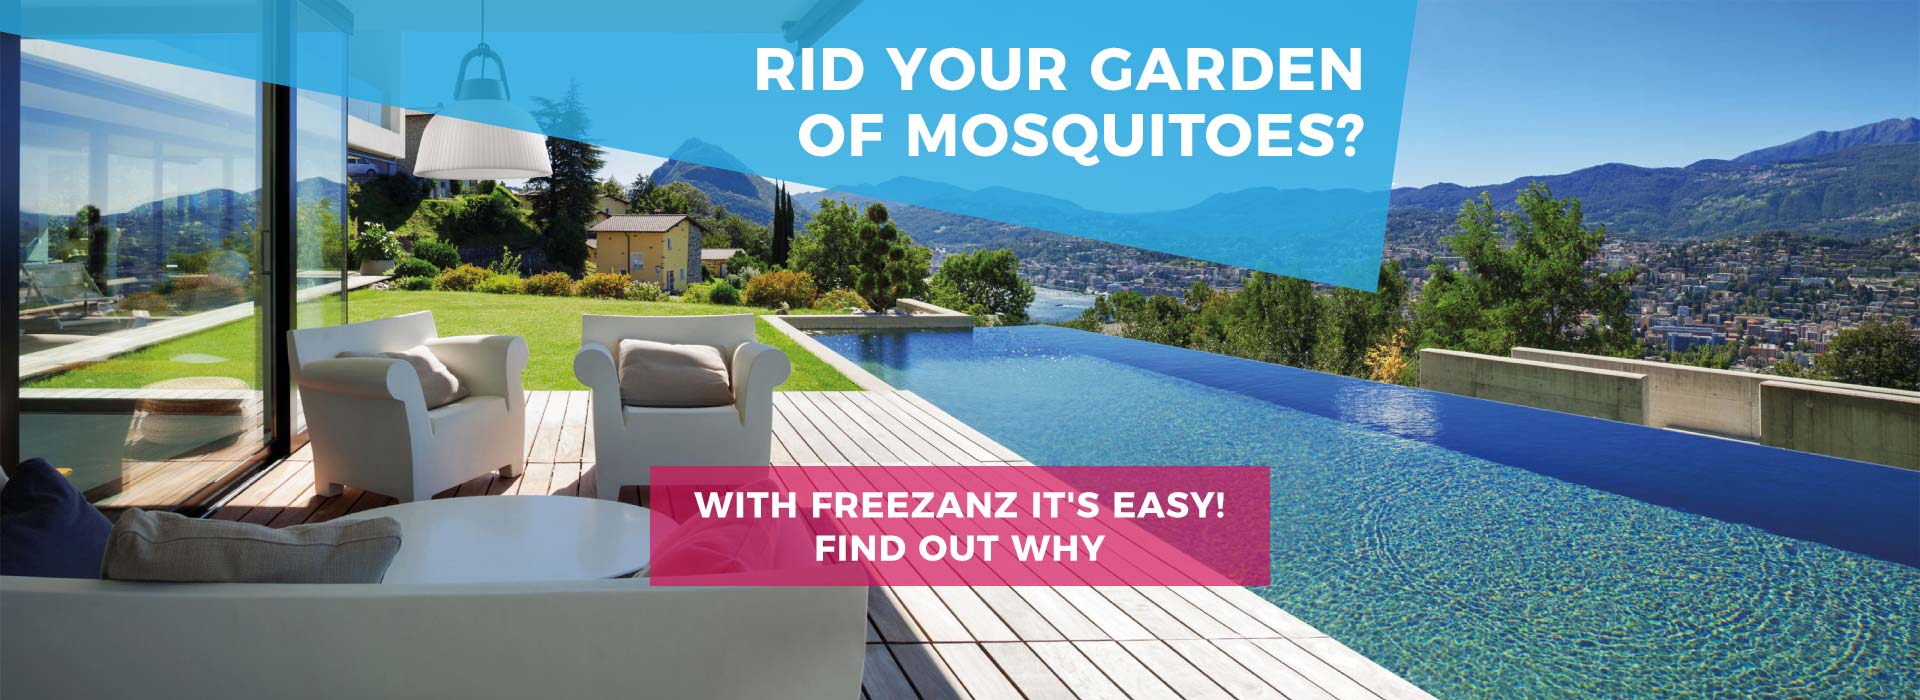 Mosquito misting systems for gardens